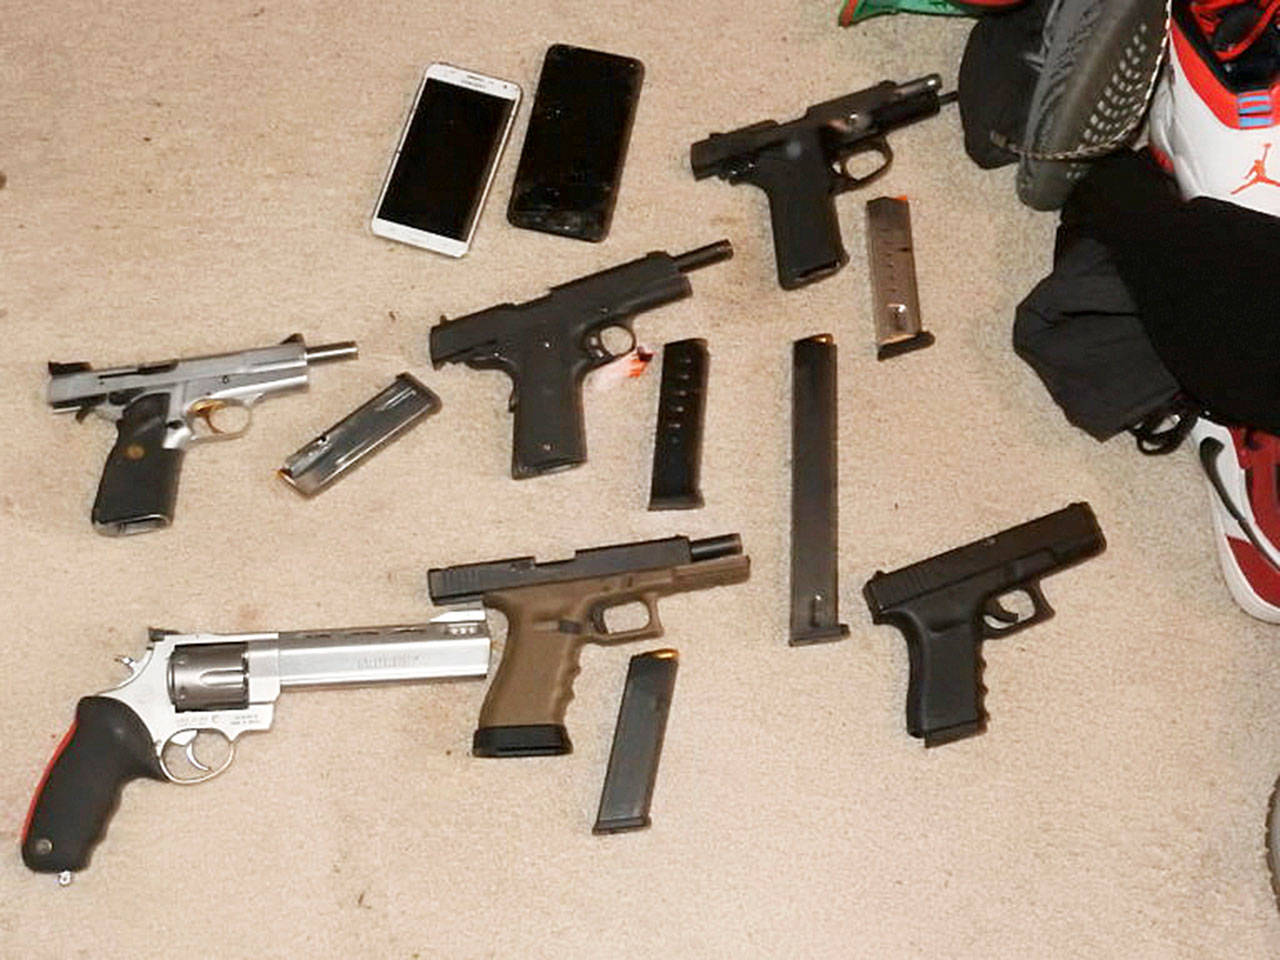 Guns found during a search warrant by Seattle Police at a suspected drug dealer’s Kent home on the East Hill. COURTESY PHOTO, Seattle Police